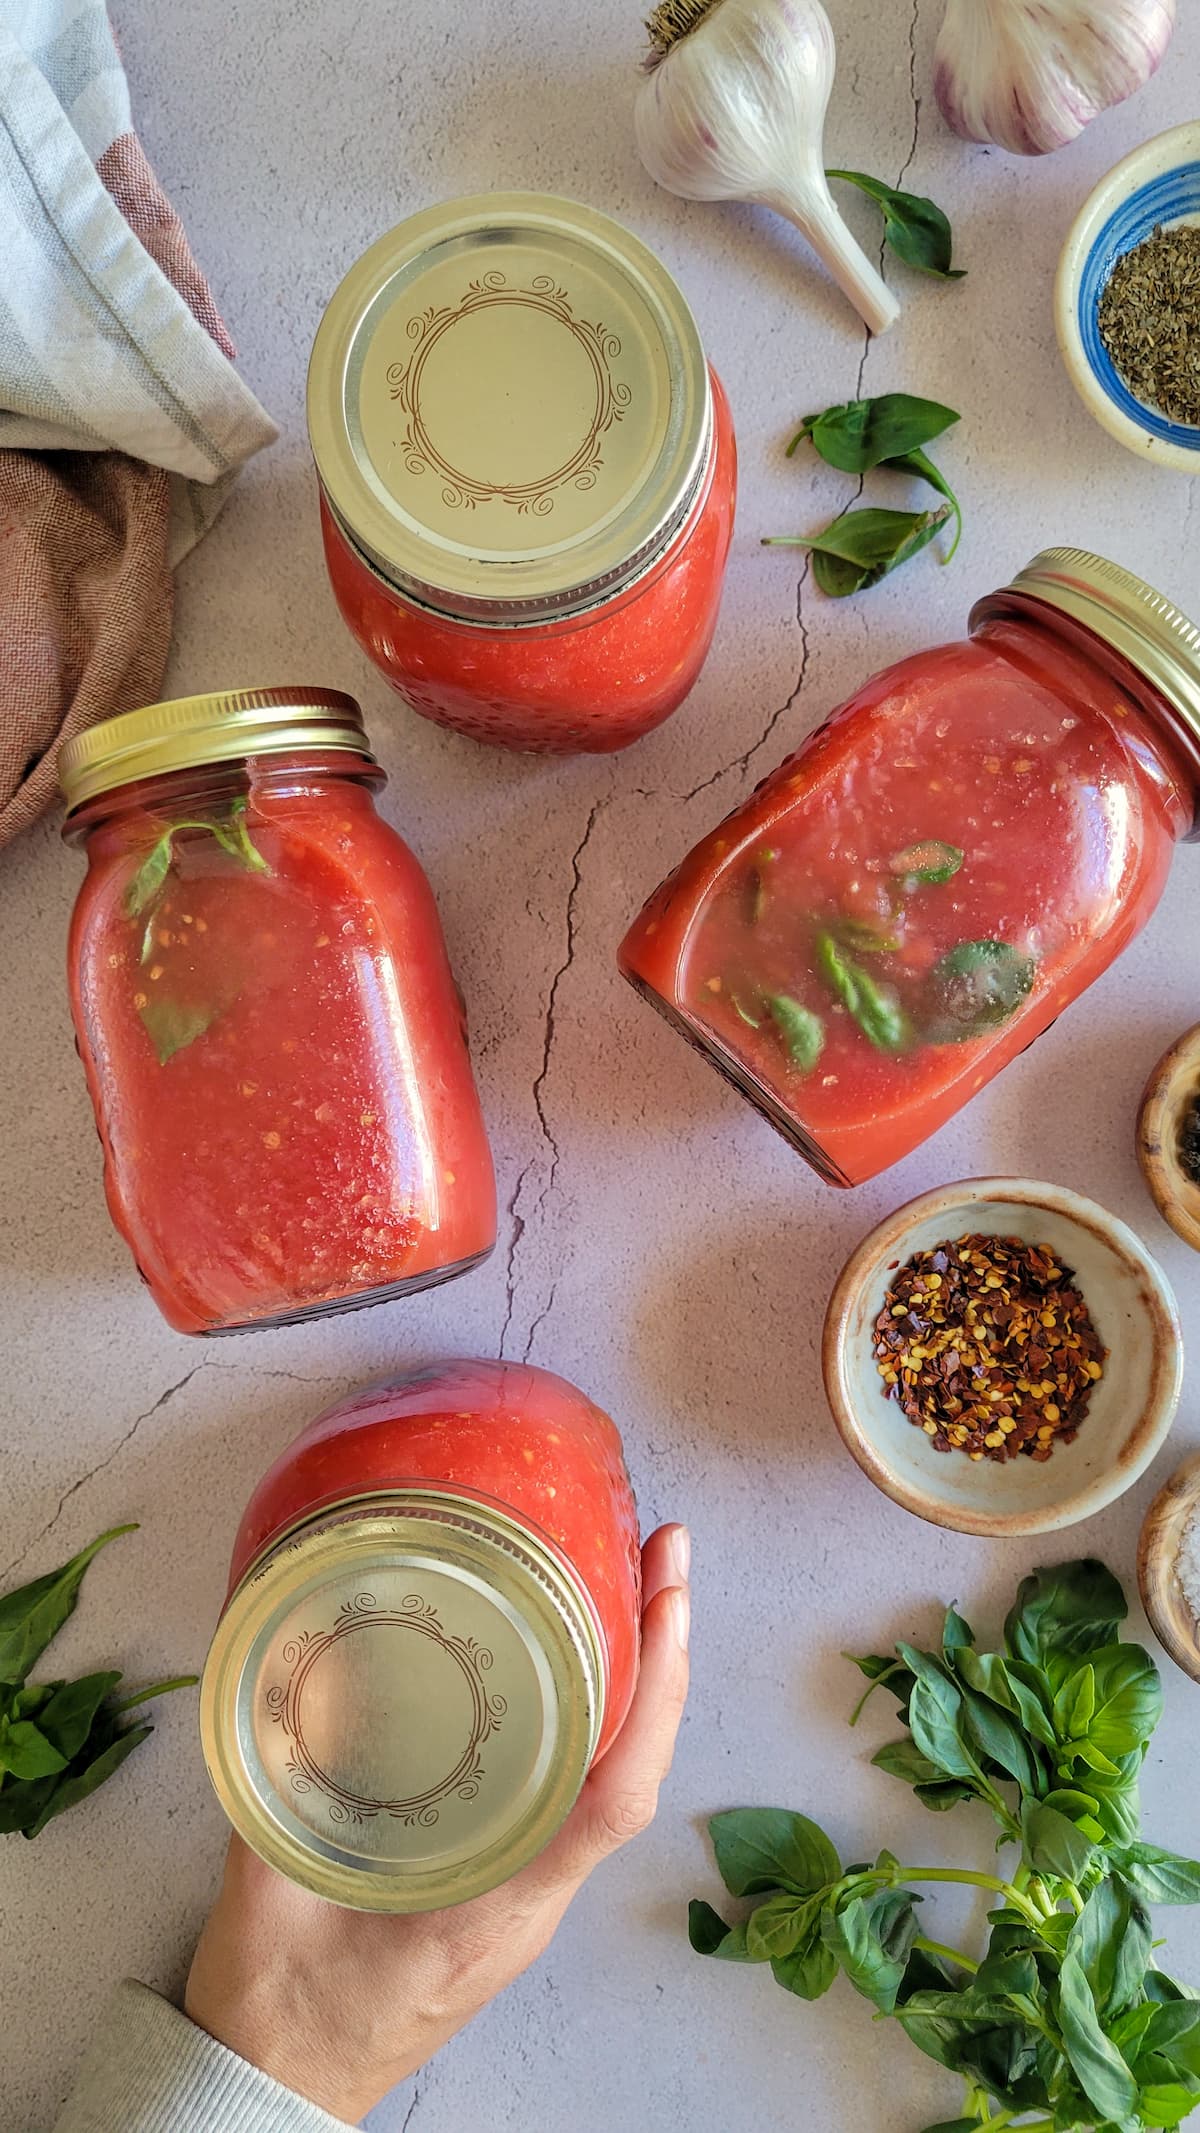 4 jars of homemade tomato sauce next to herbs and spices